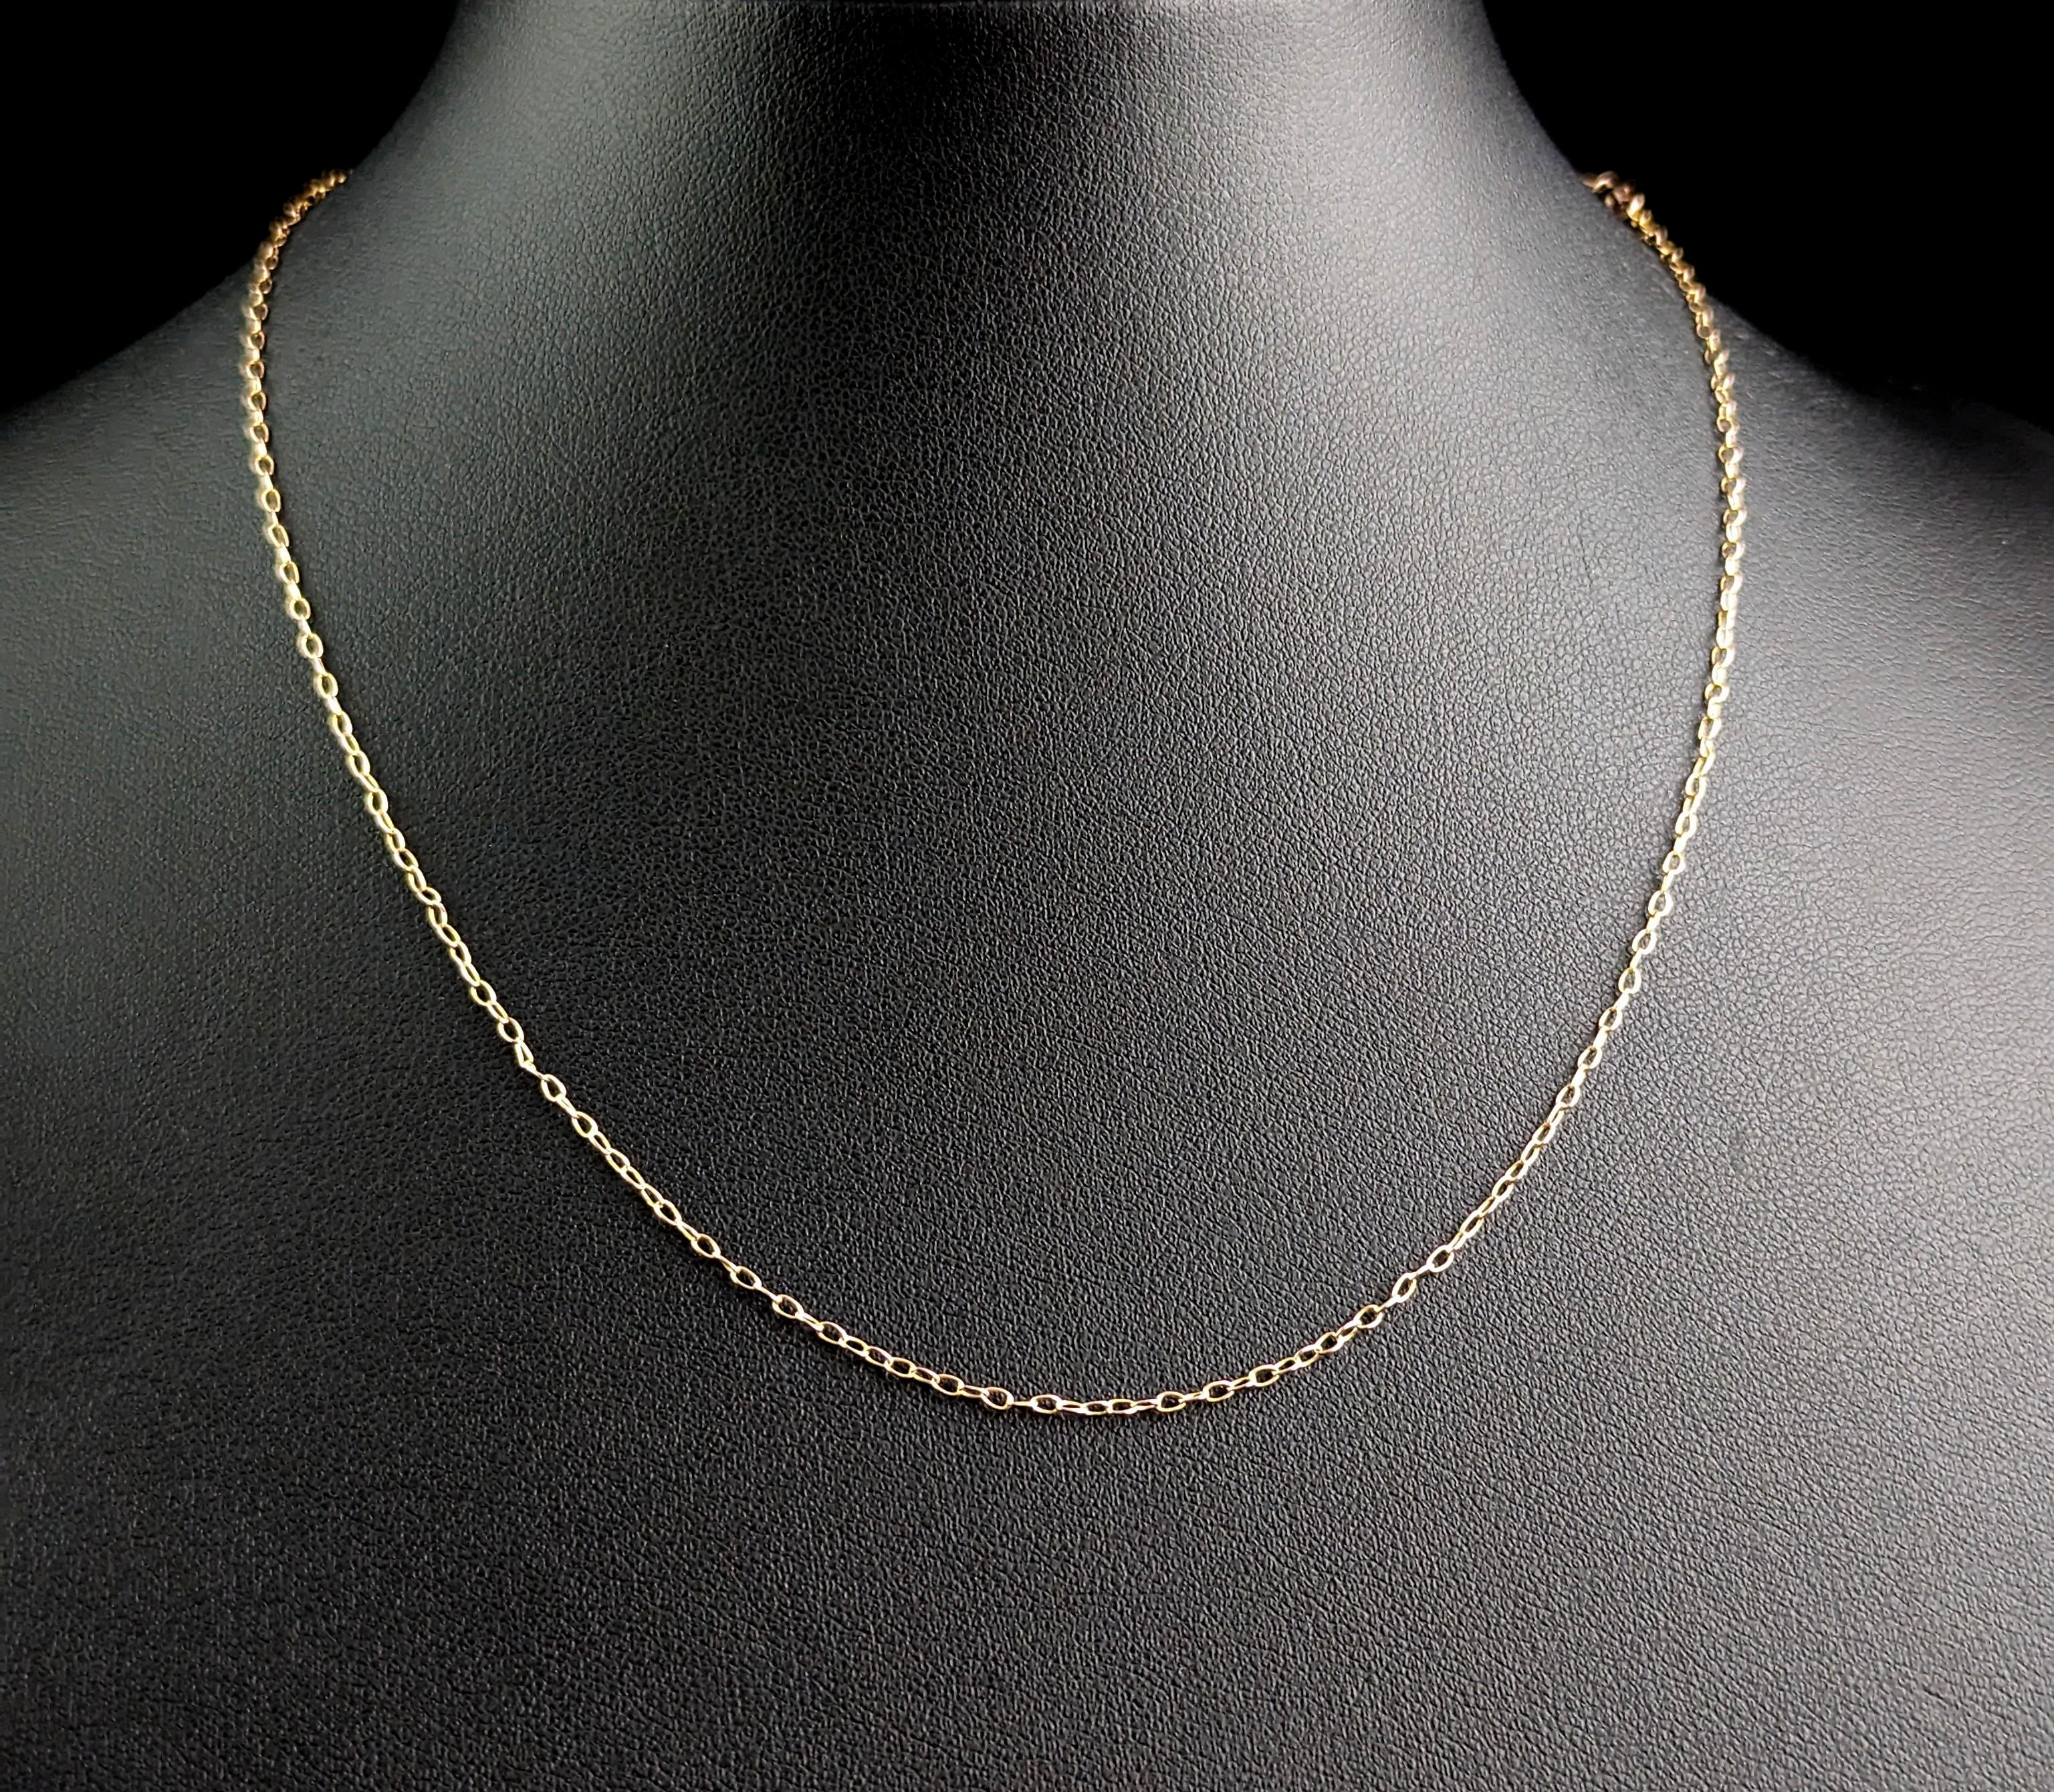 Antique 9k Gold Dainty Trace Link Chain Necklace, Edwardian 2